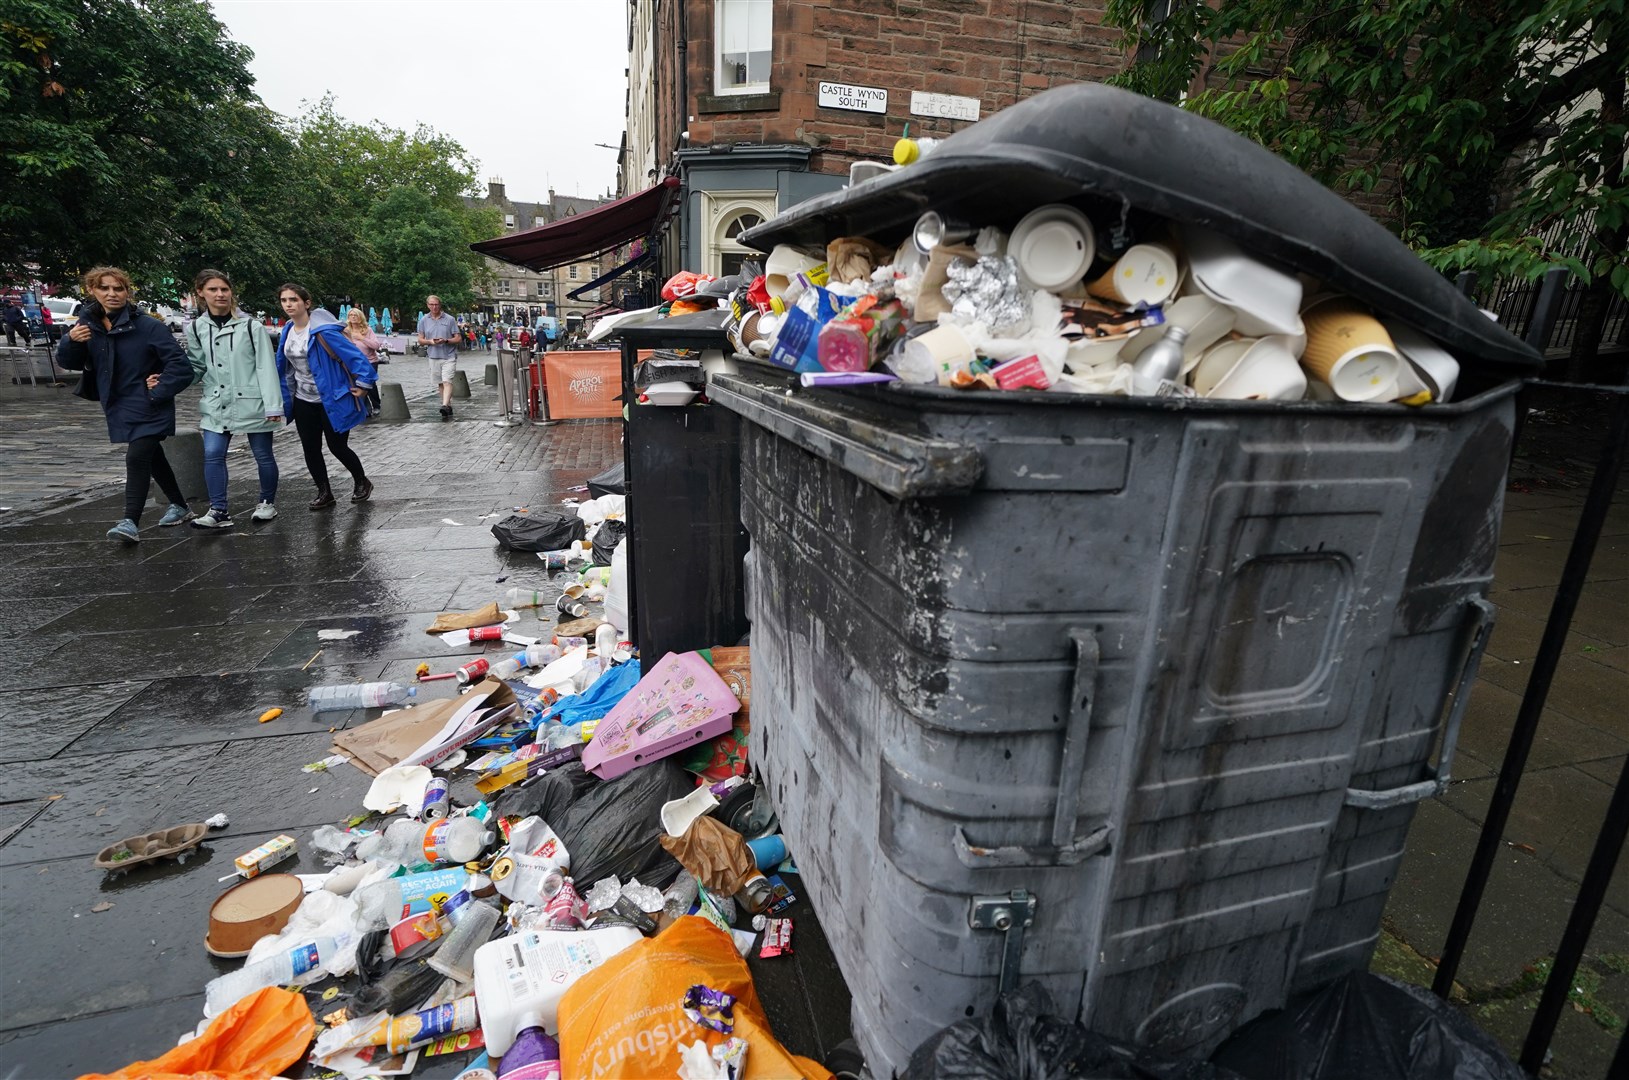 Council cleansing staff in Edinburgh have been out on strike since August 18 (Andrew Milligan/PA)